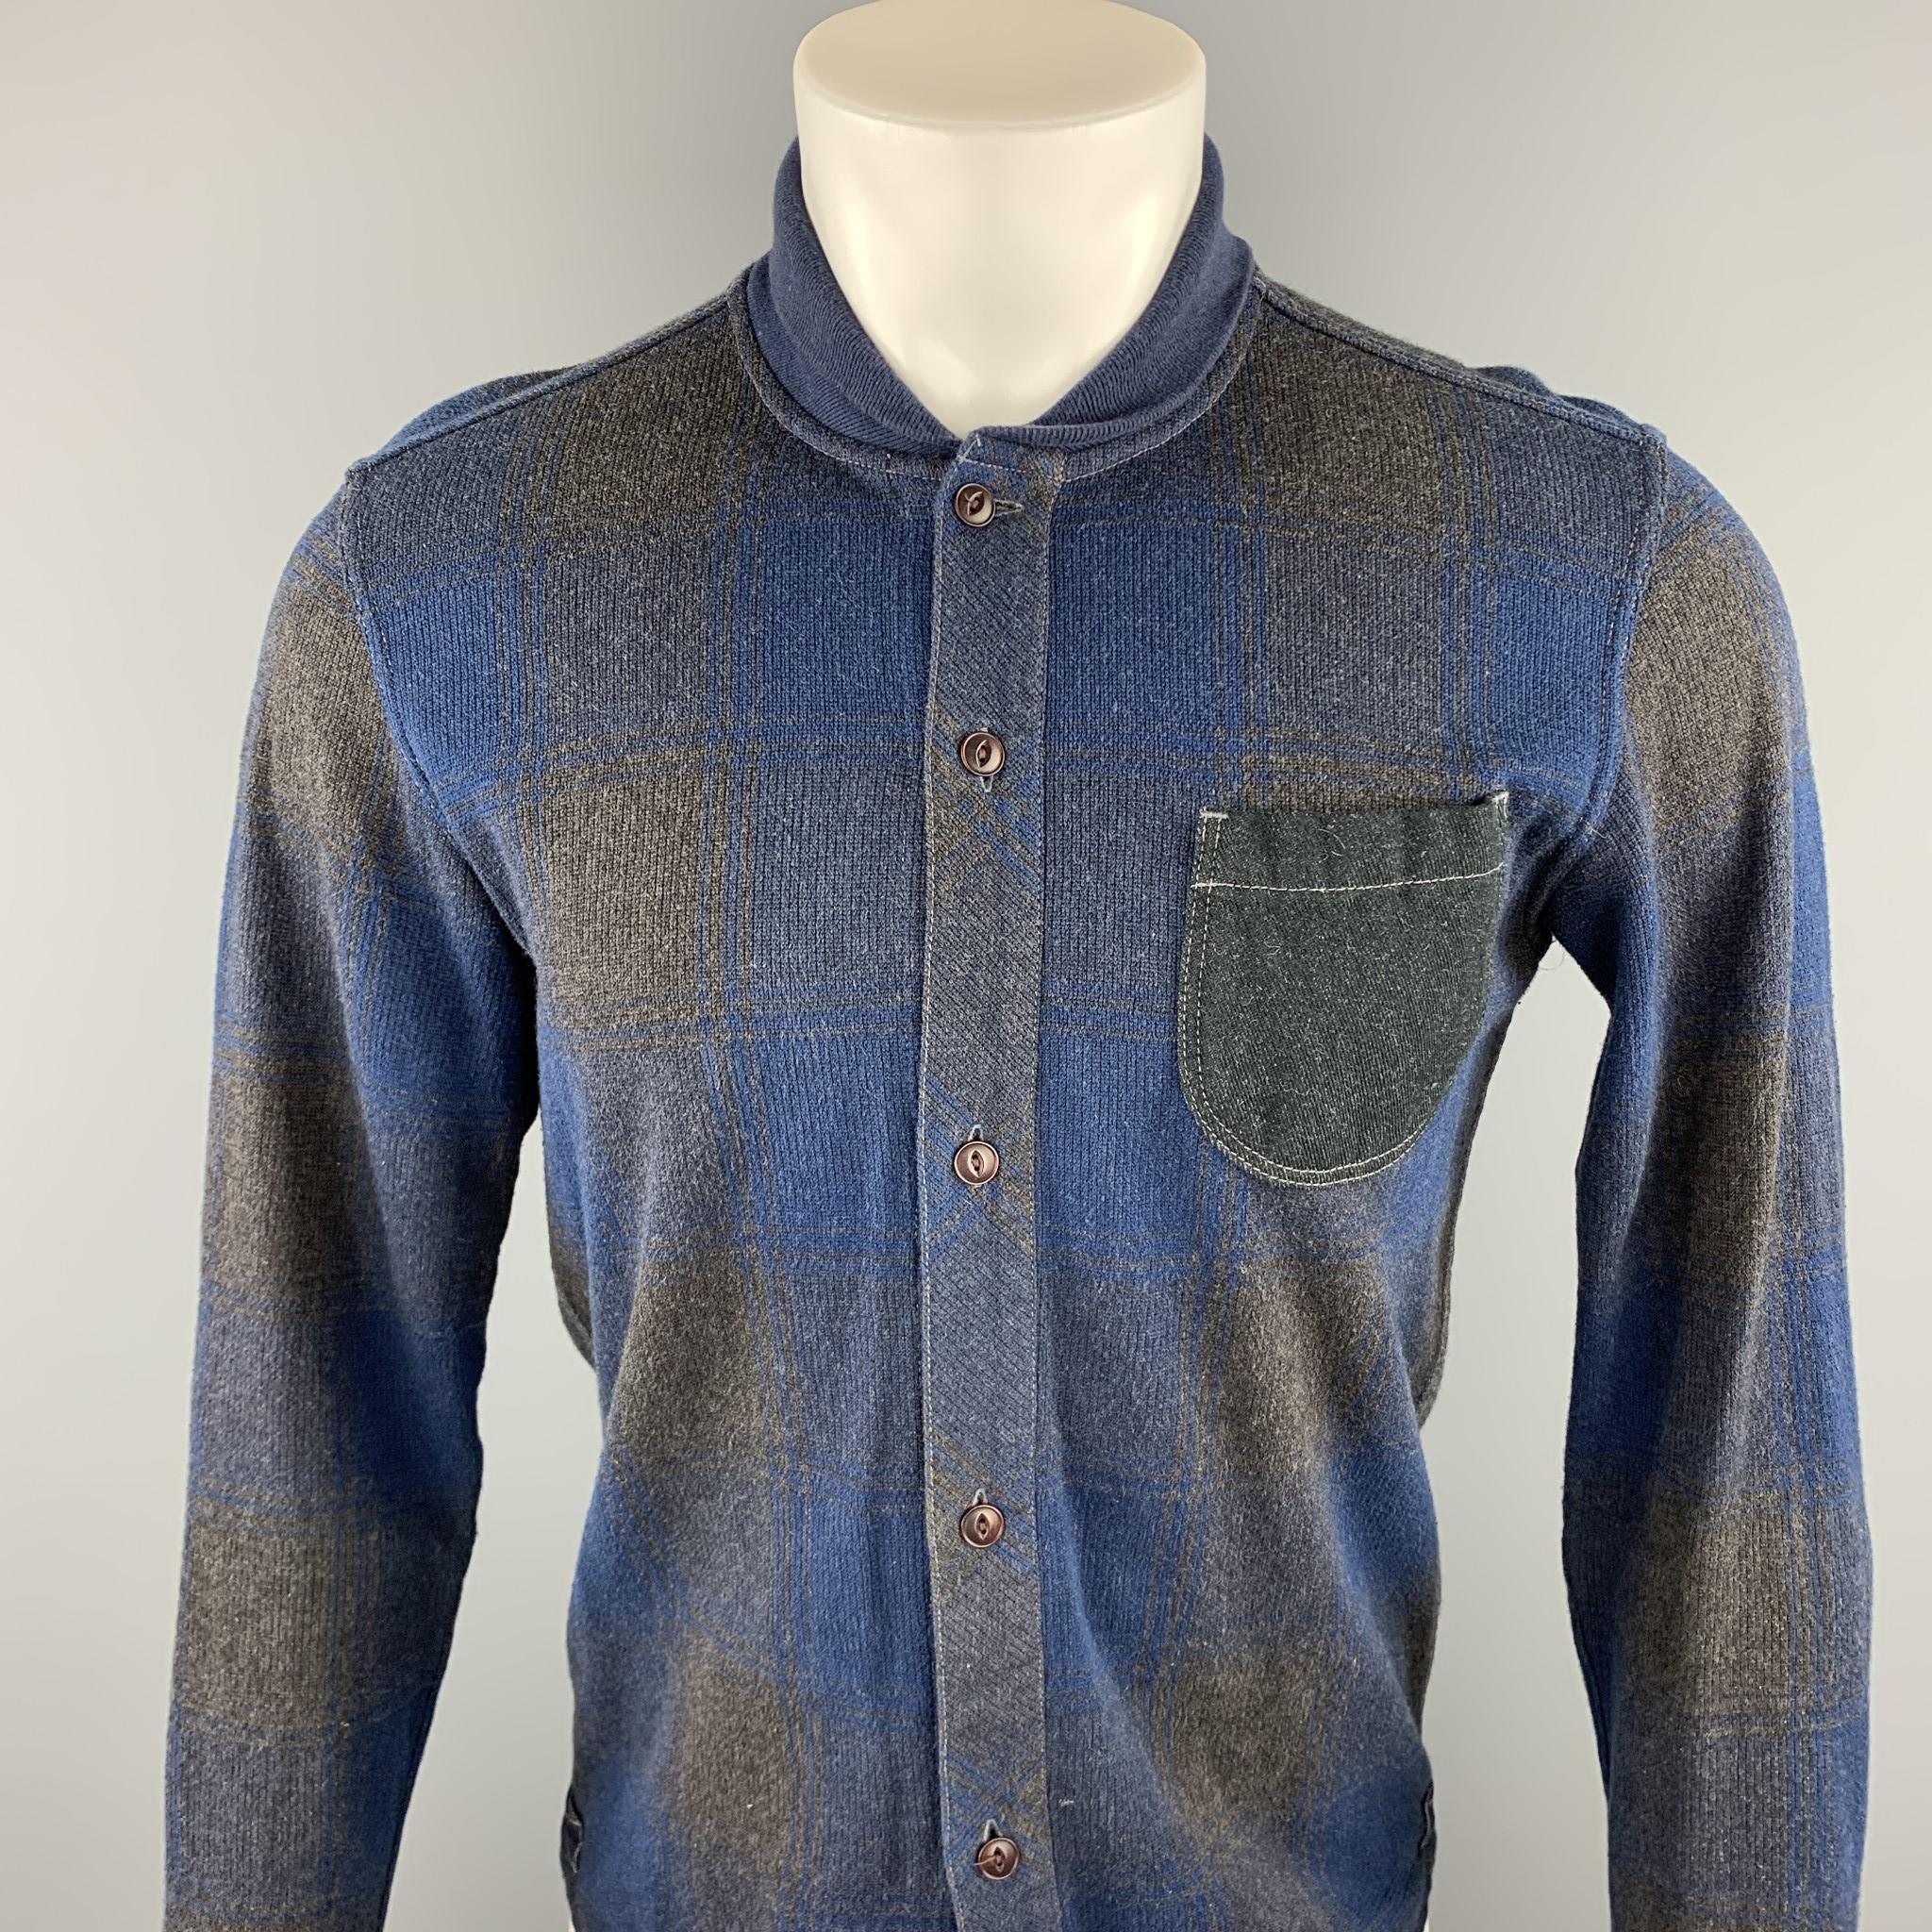 JUNYA WATANABE Comme des Garcons MAN shirt comes in a navy & gray plaid cotton featuring a jacket button up style, contrast stitching, elbow patch detail, front patch pocket, and a knitted stand up collar. Made in Japan.

Excellent Pre-Owned